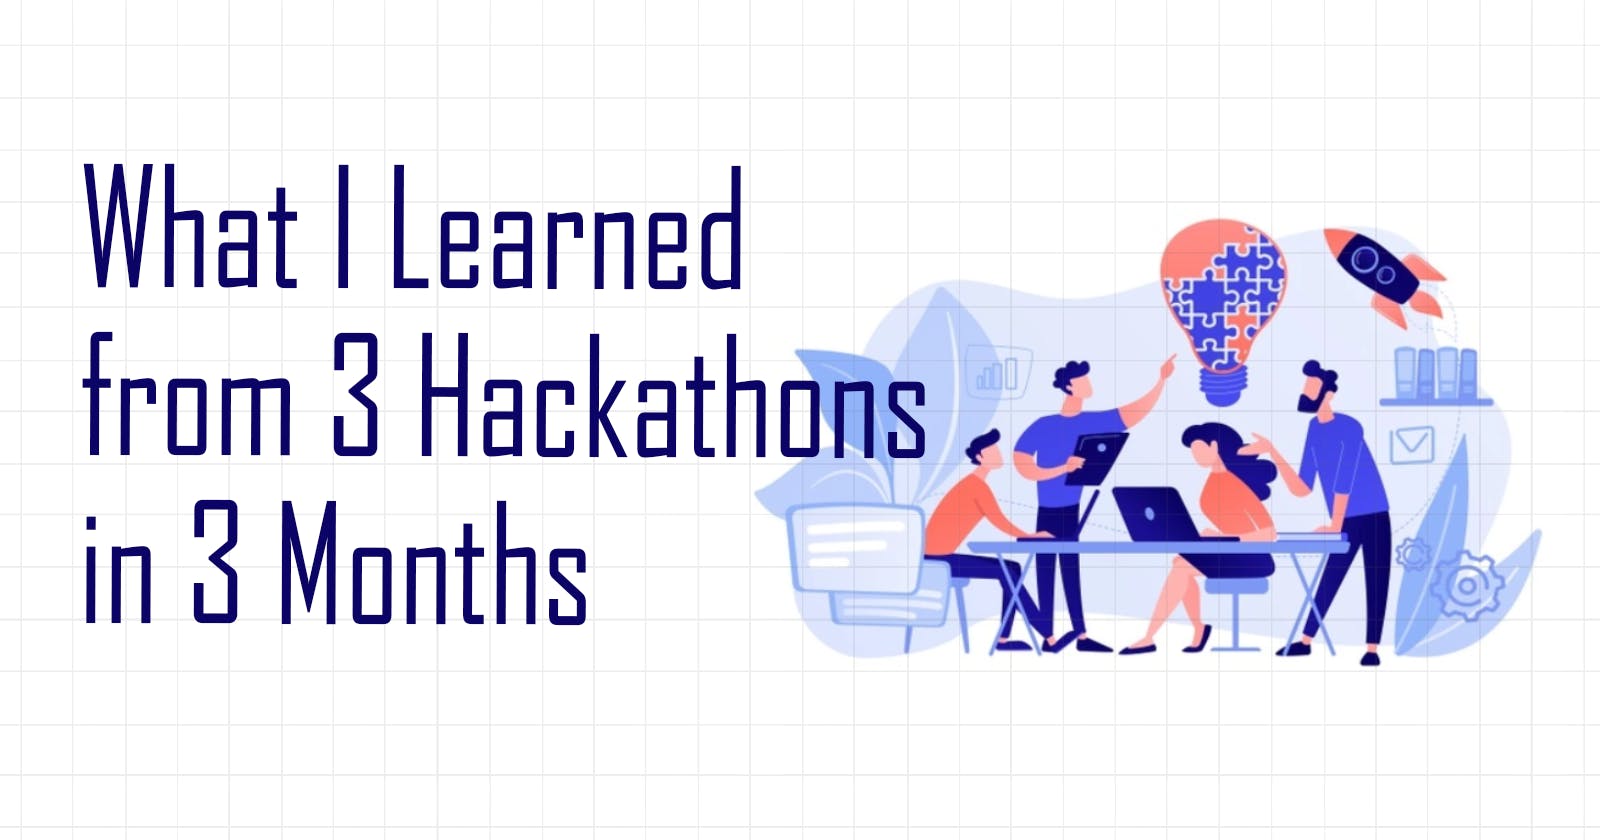 What I Learned from 3 Hackathons in 3 months